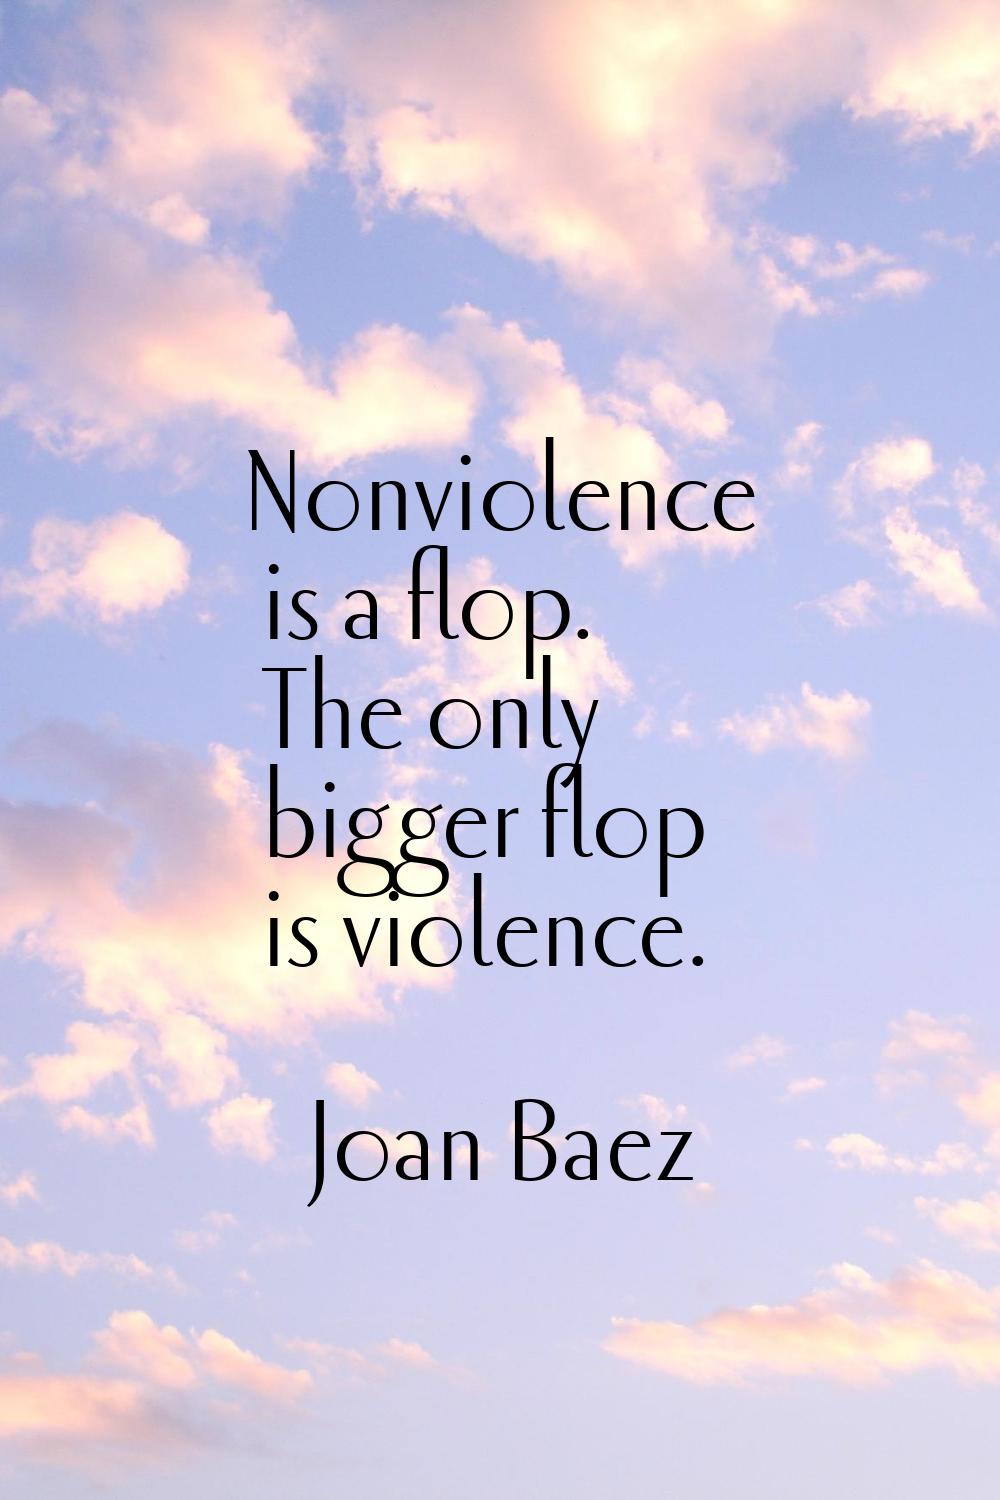 Nonviolence is a flop. The only bigger flop is violence.